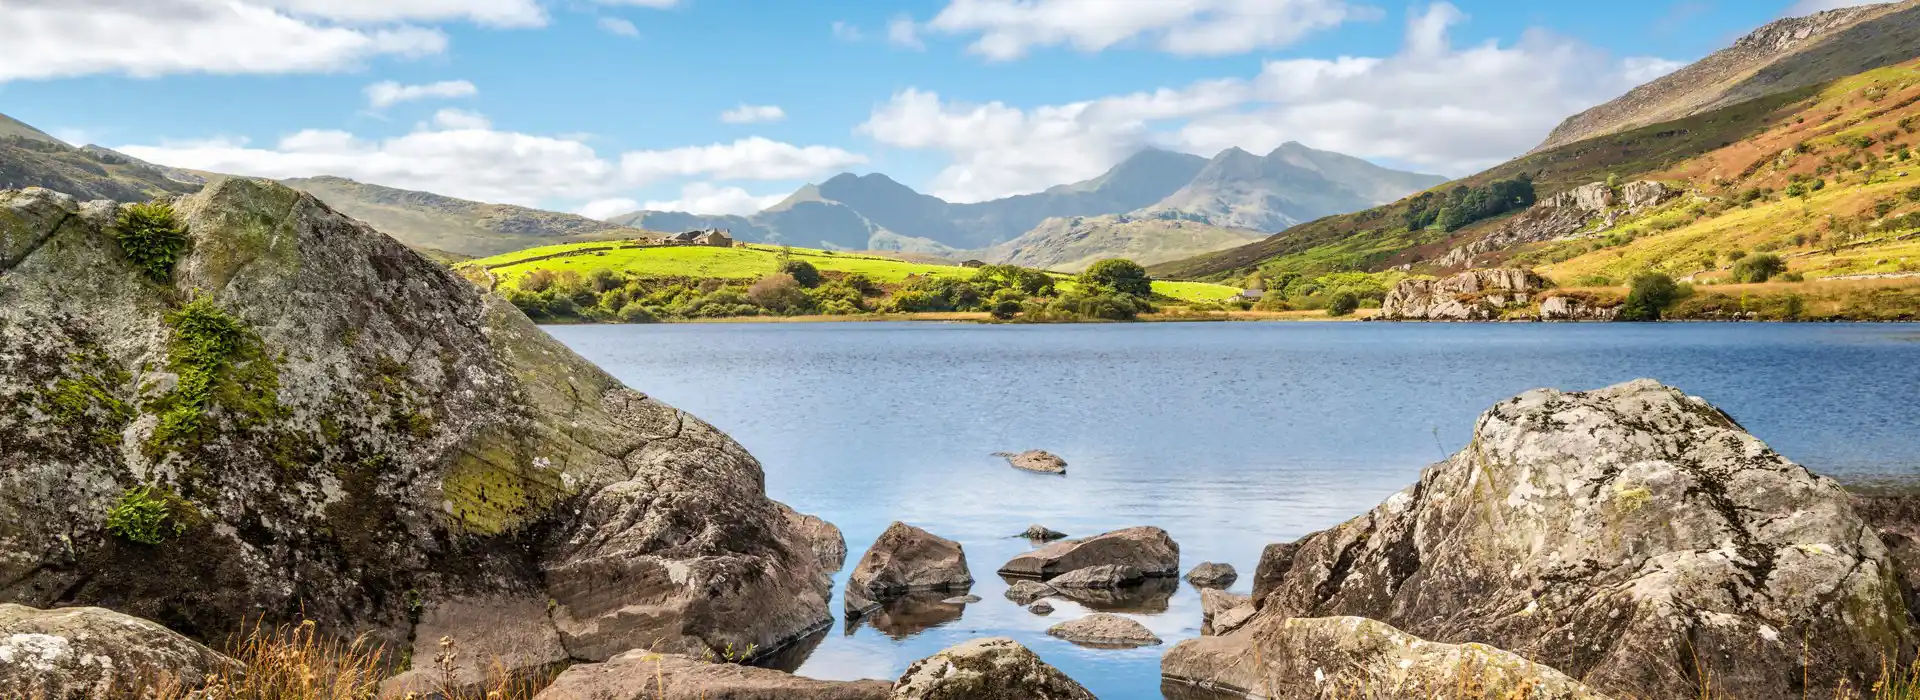 Best campsites in North Wales